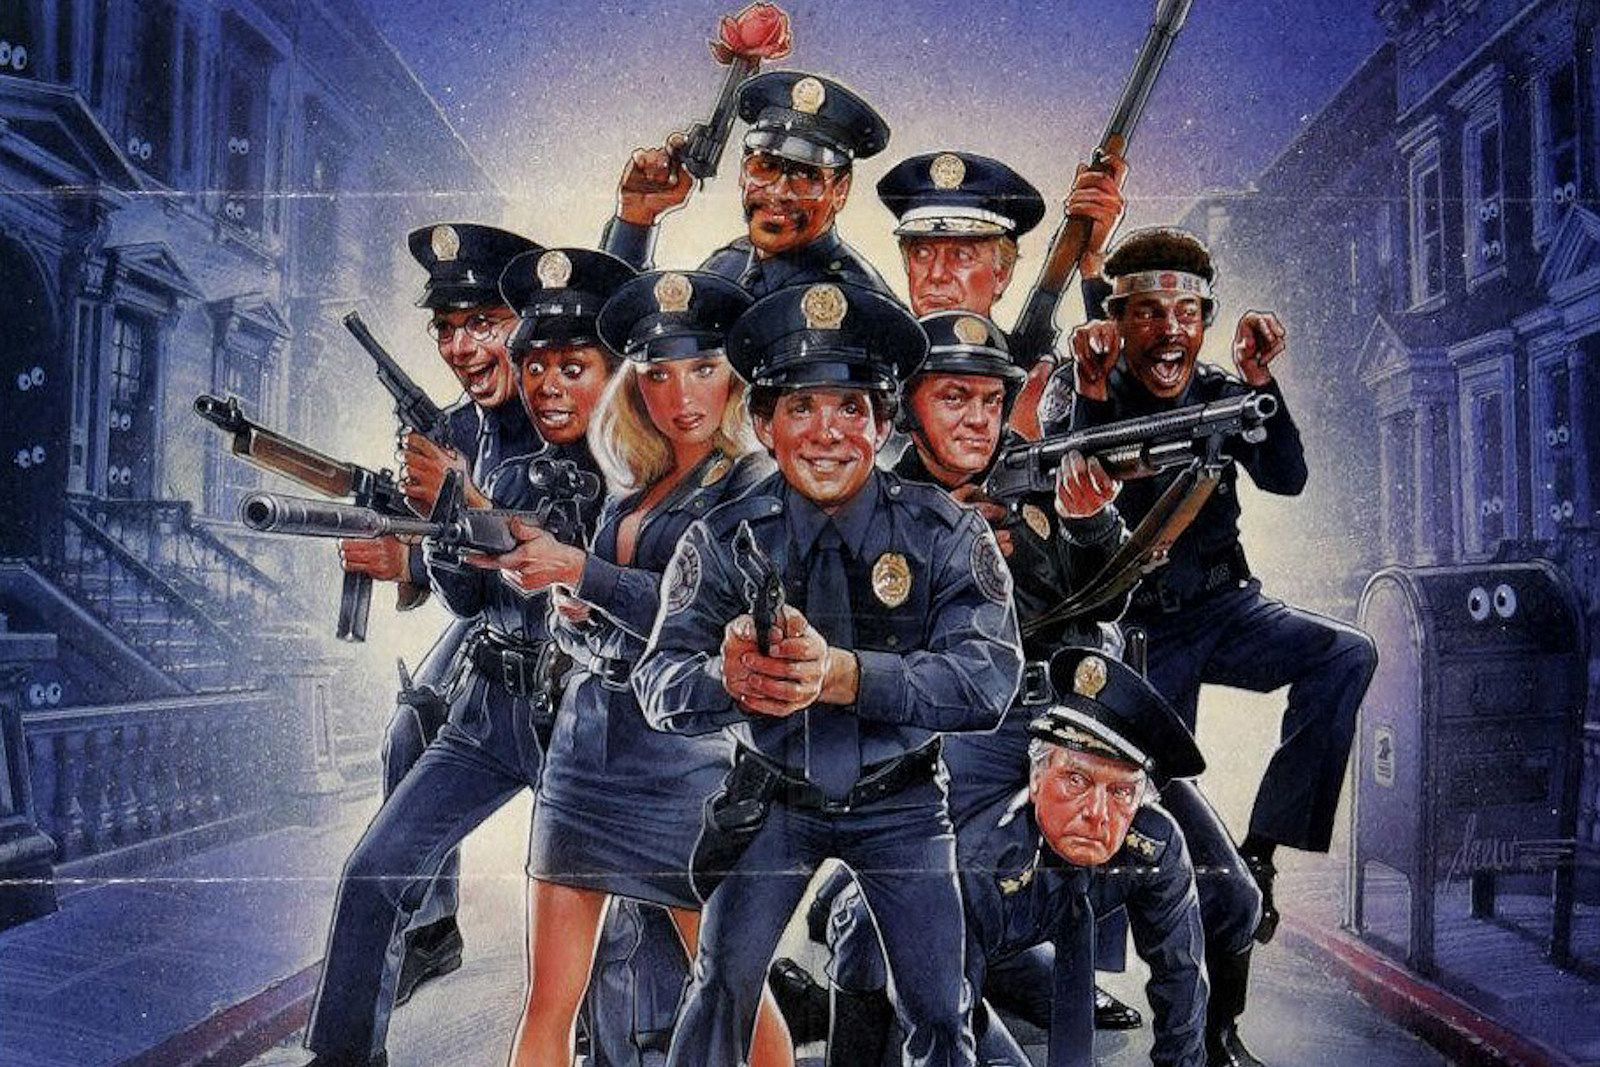 35 Years Ago: 'Police Academy 2' Scores Another 'Moronic' Hit